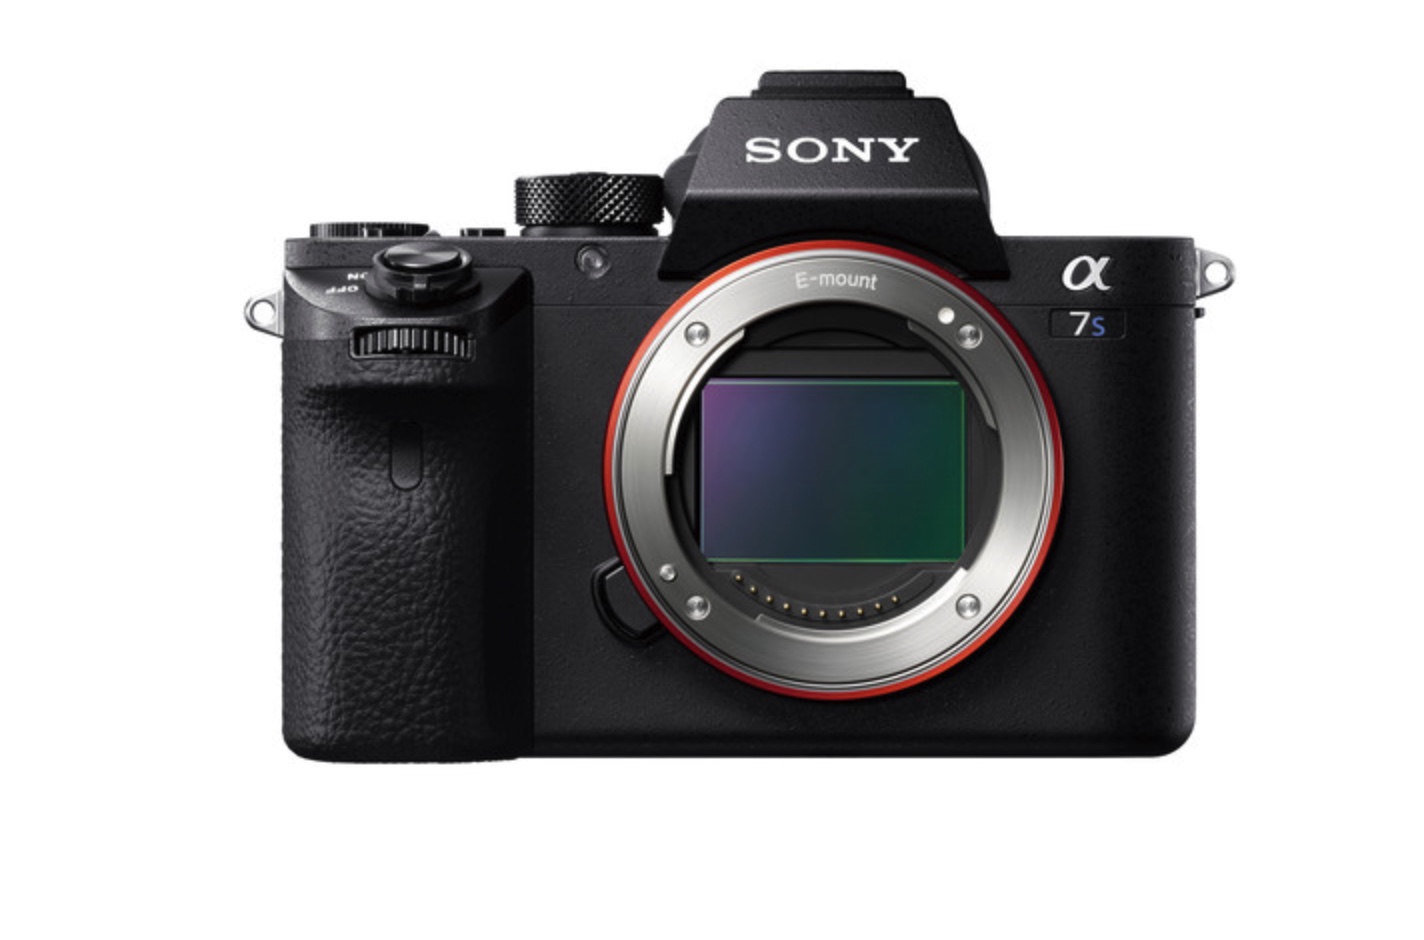 http://thedigitalstory.com/2015/09/15/sony-a7s-2-front.jpg